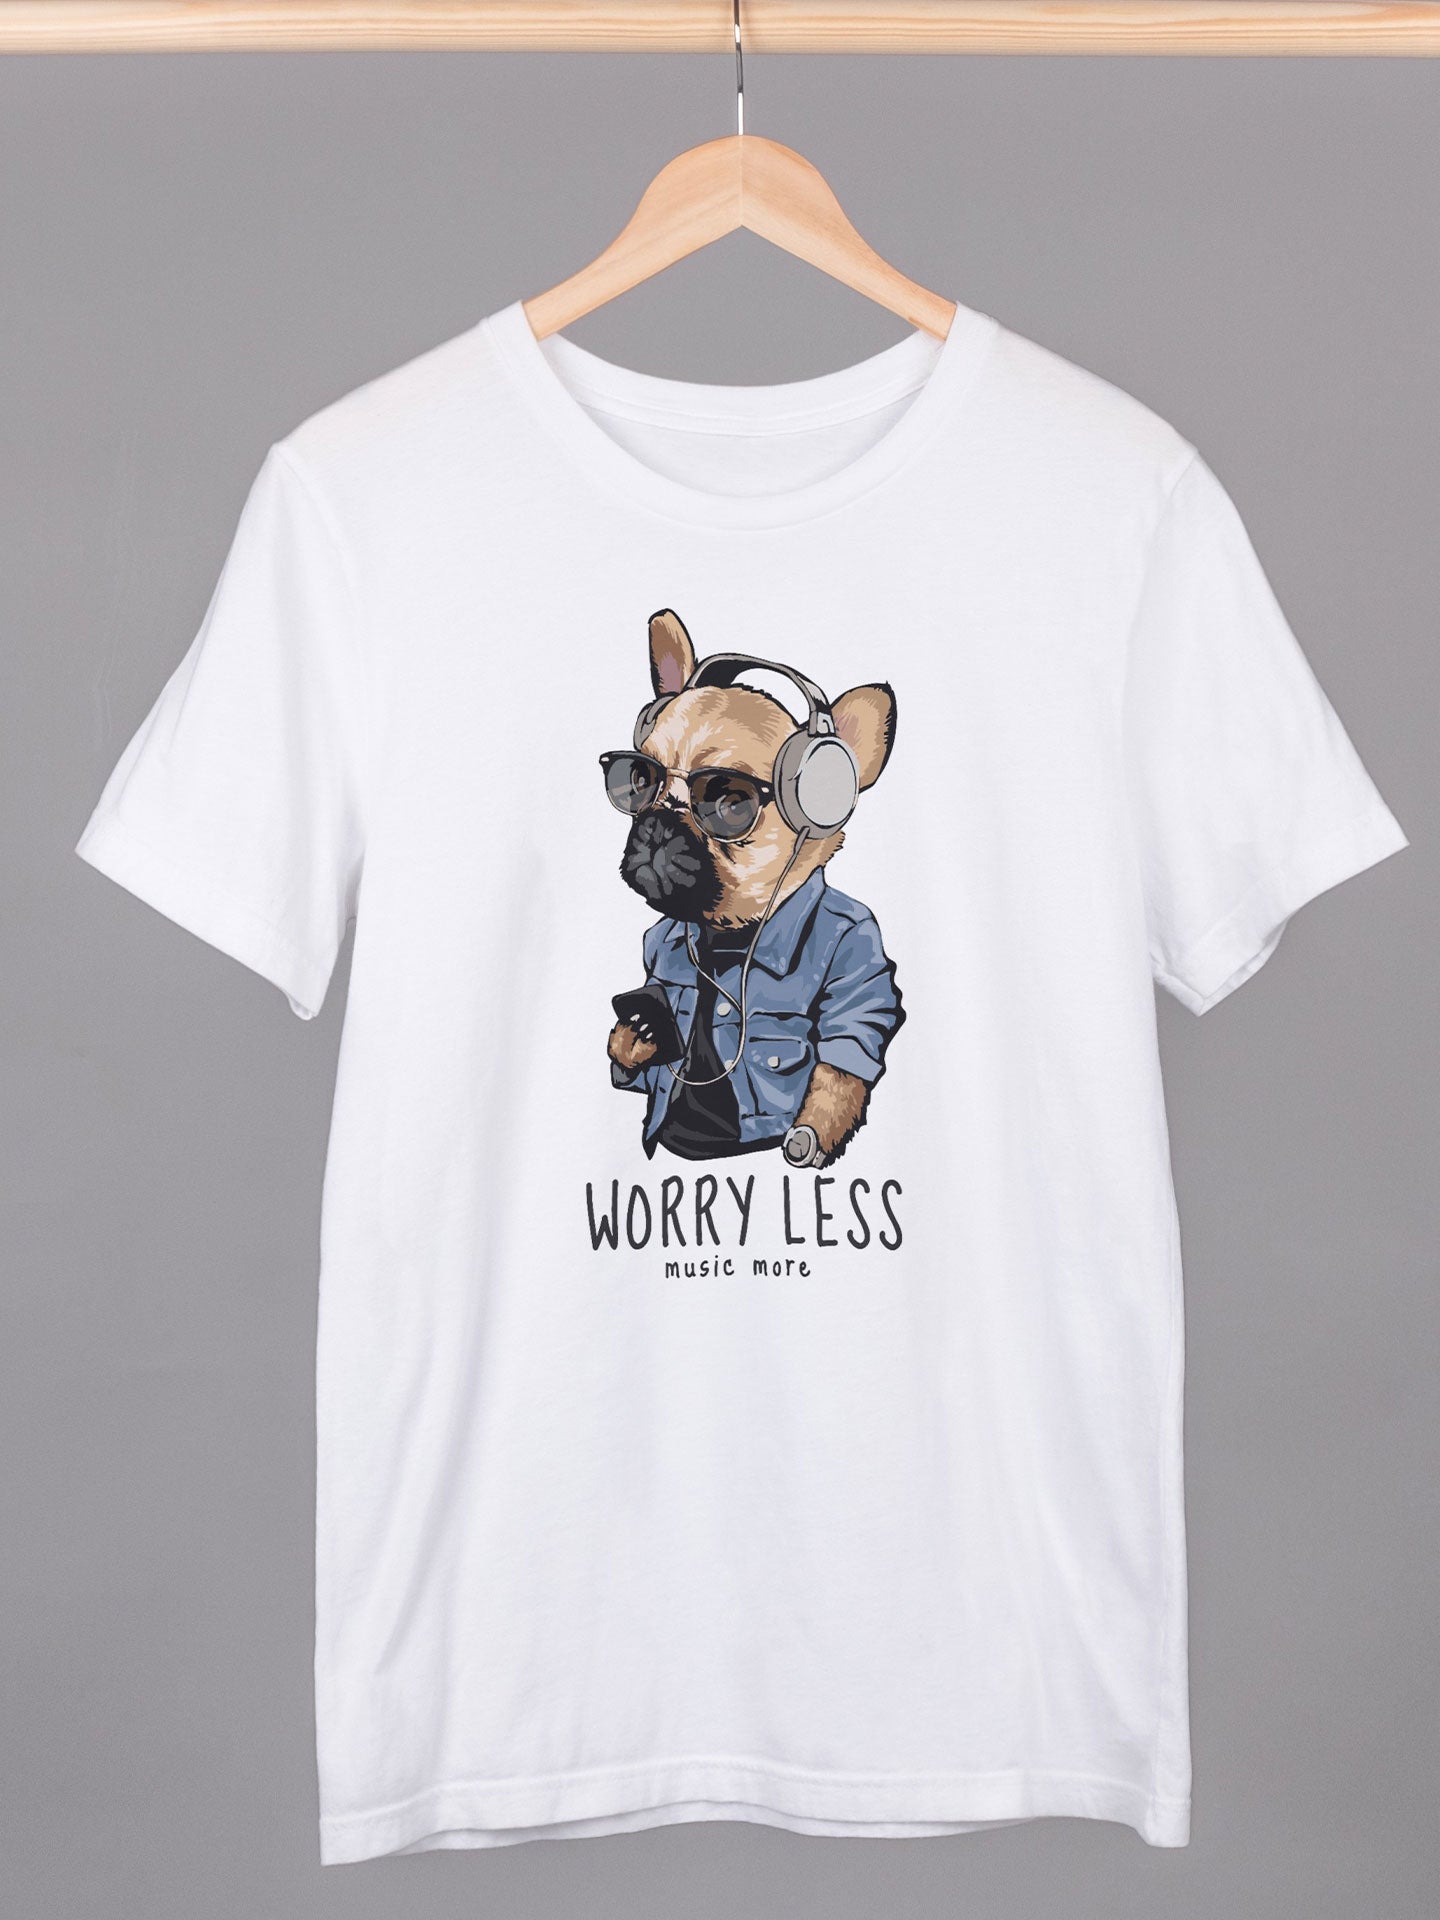 Men's White Worry Less Music More Printed T-shirt